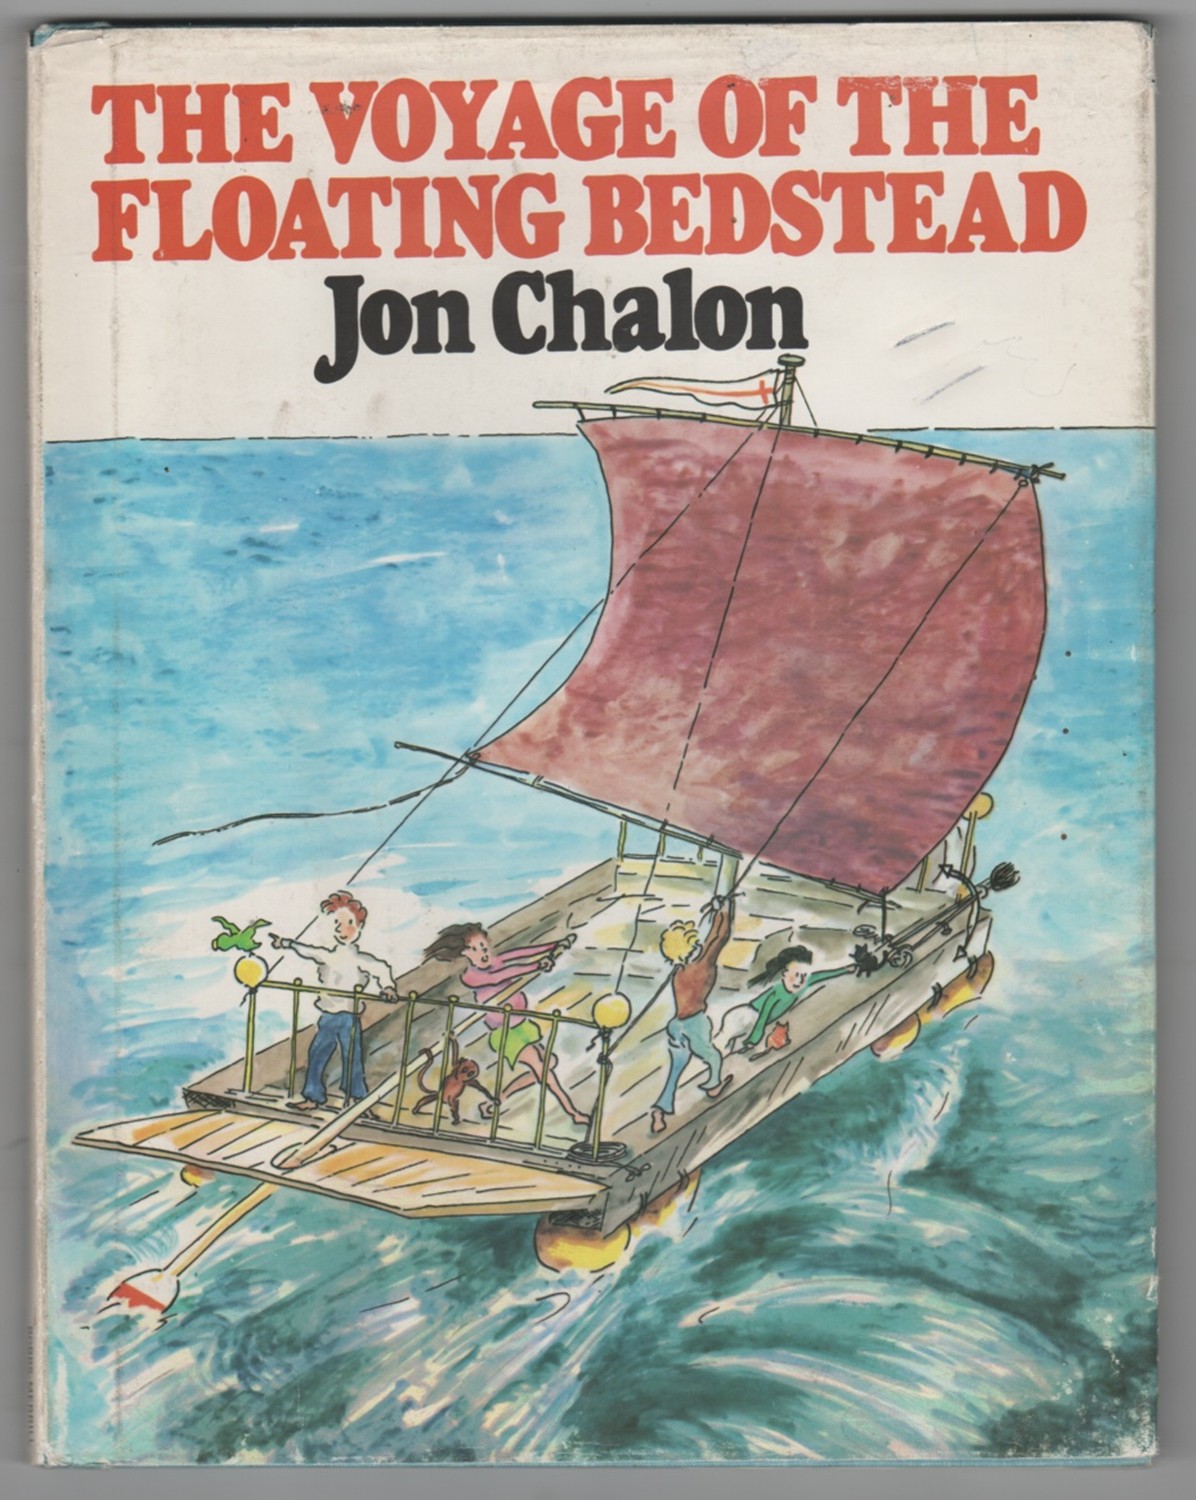 CHALON, JON - The Voyage of the Floating Bedstead